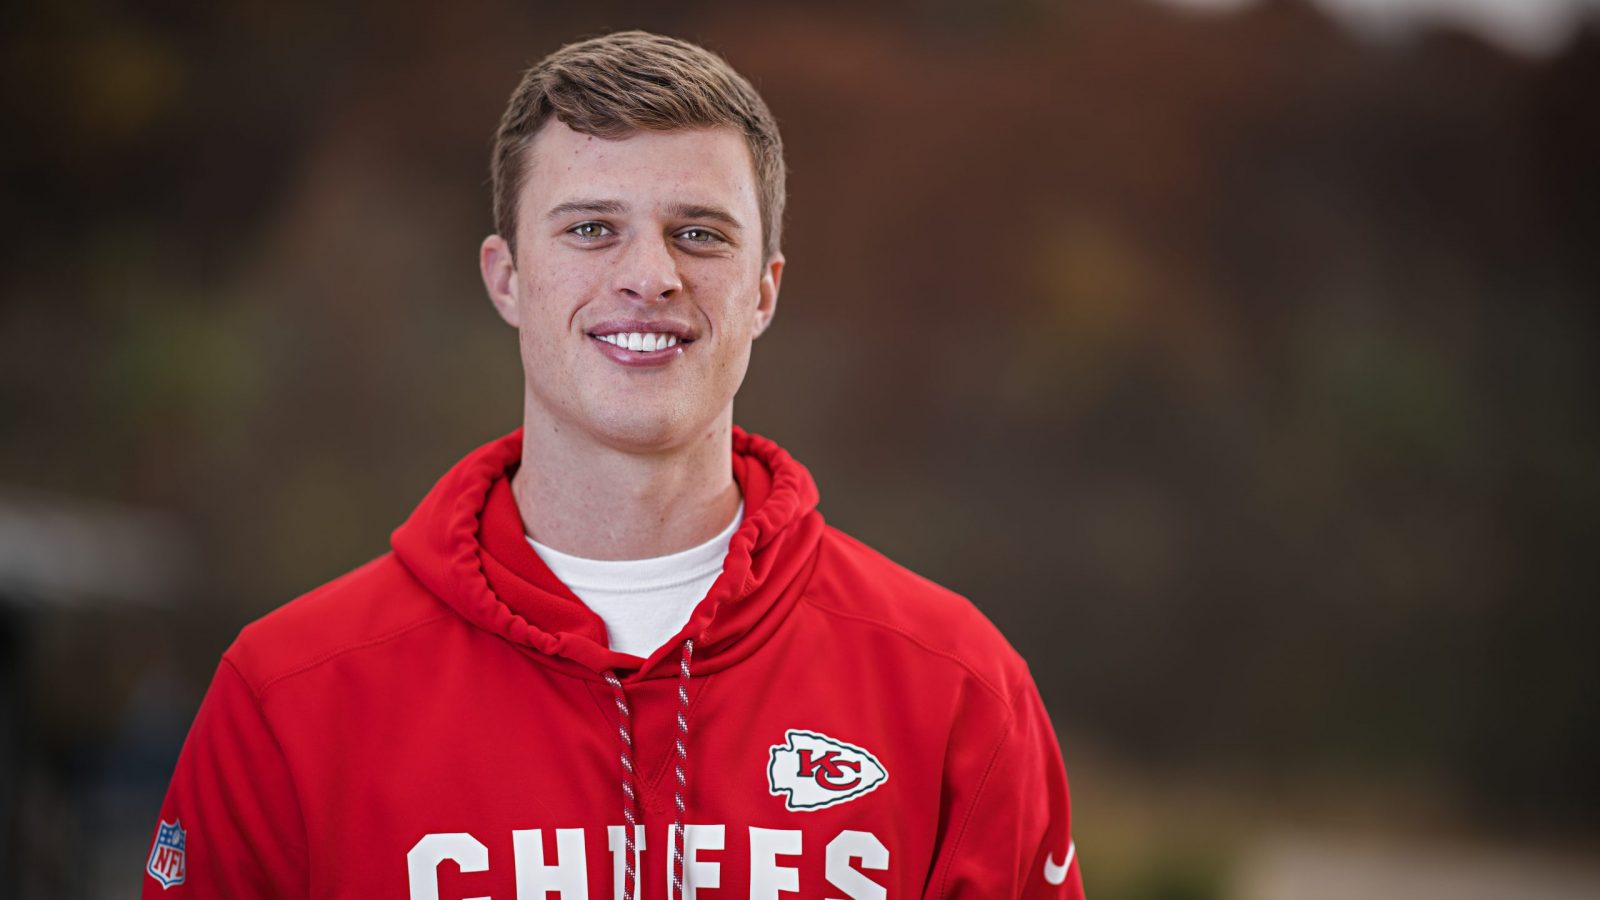 For Chiefs' star kicker, his Catholic faith and family are his priority